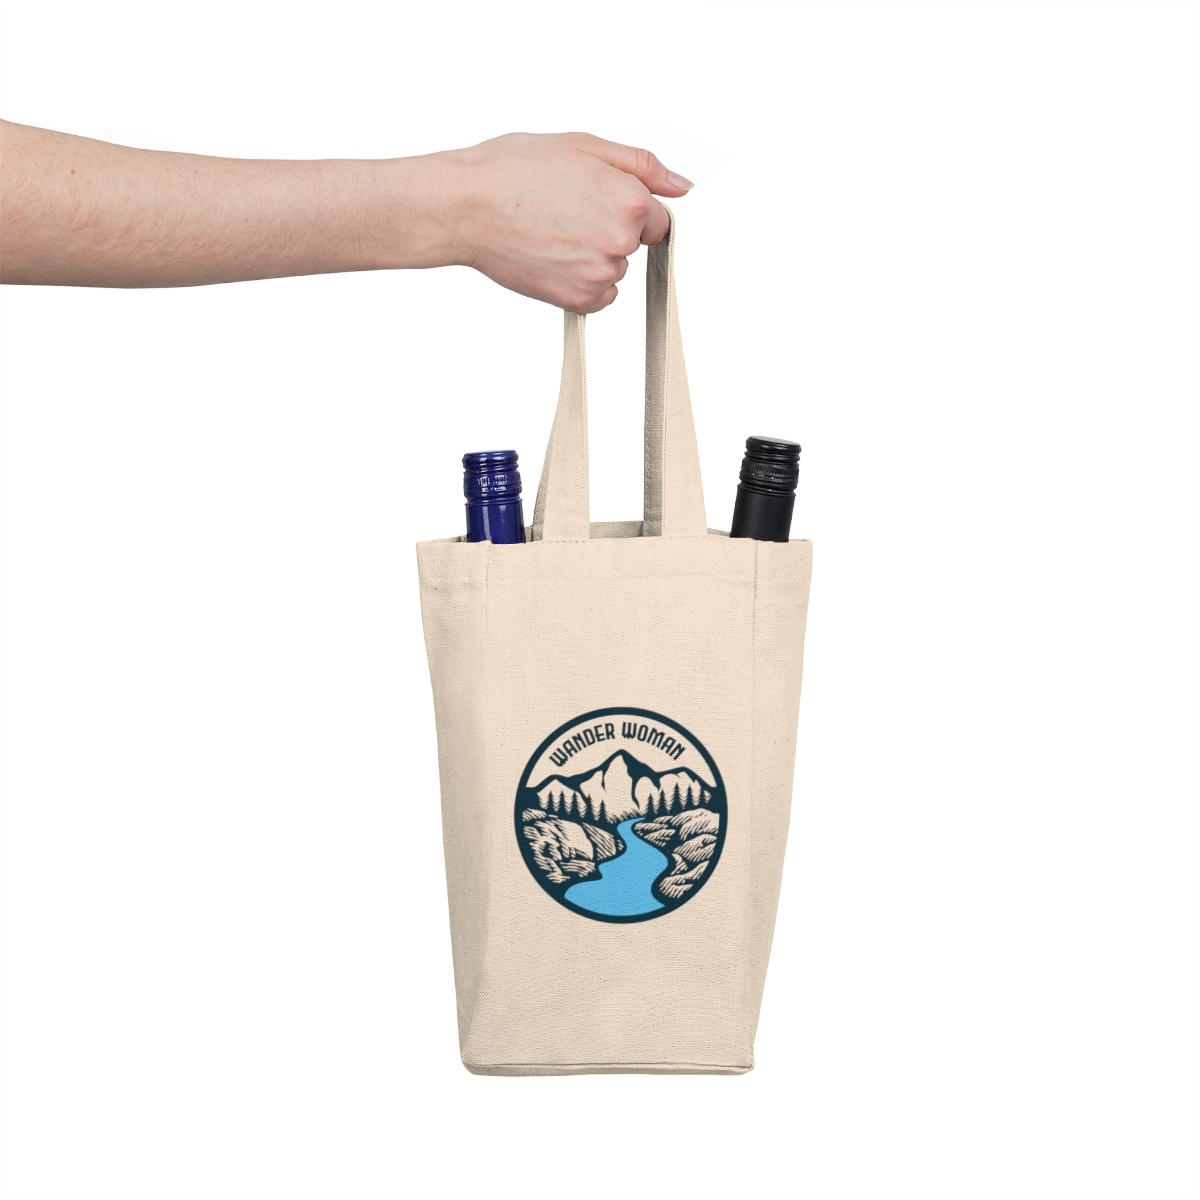 Wander Woman Wine Tote Bag: Blue Mountain Graphic, 100% Cotton Canvas, Holds Two - $31.93